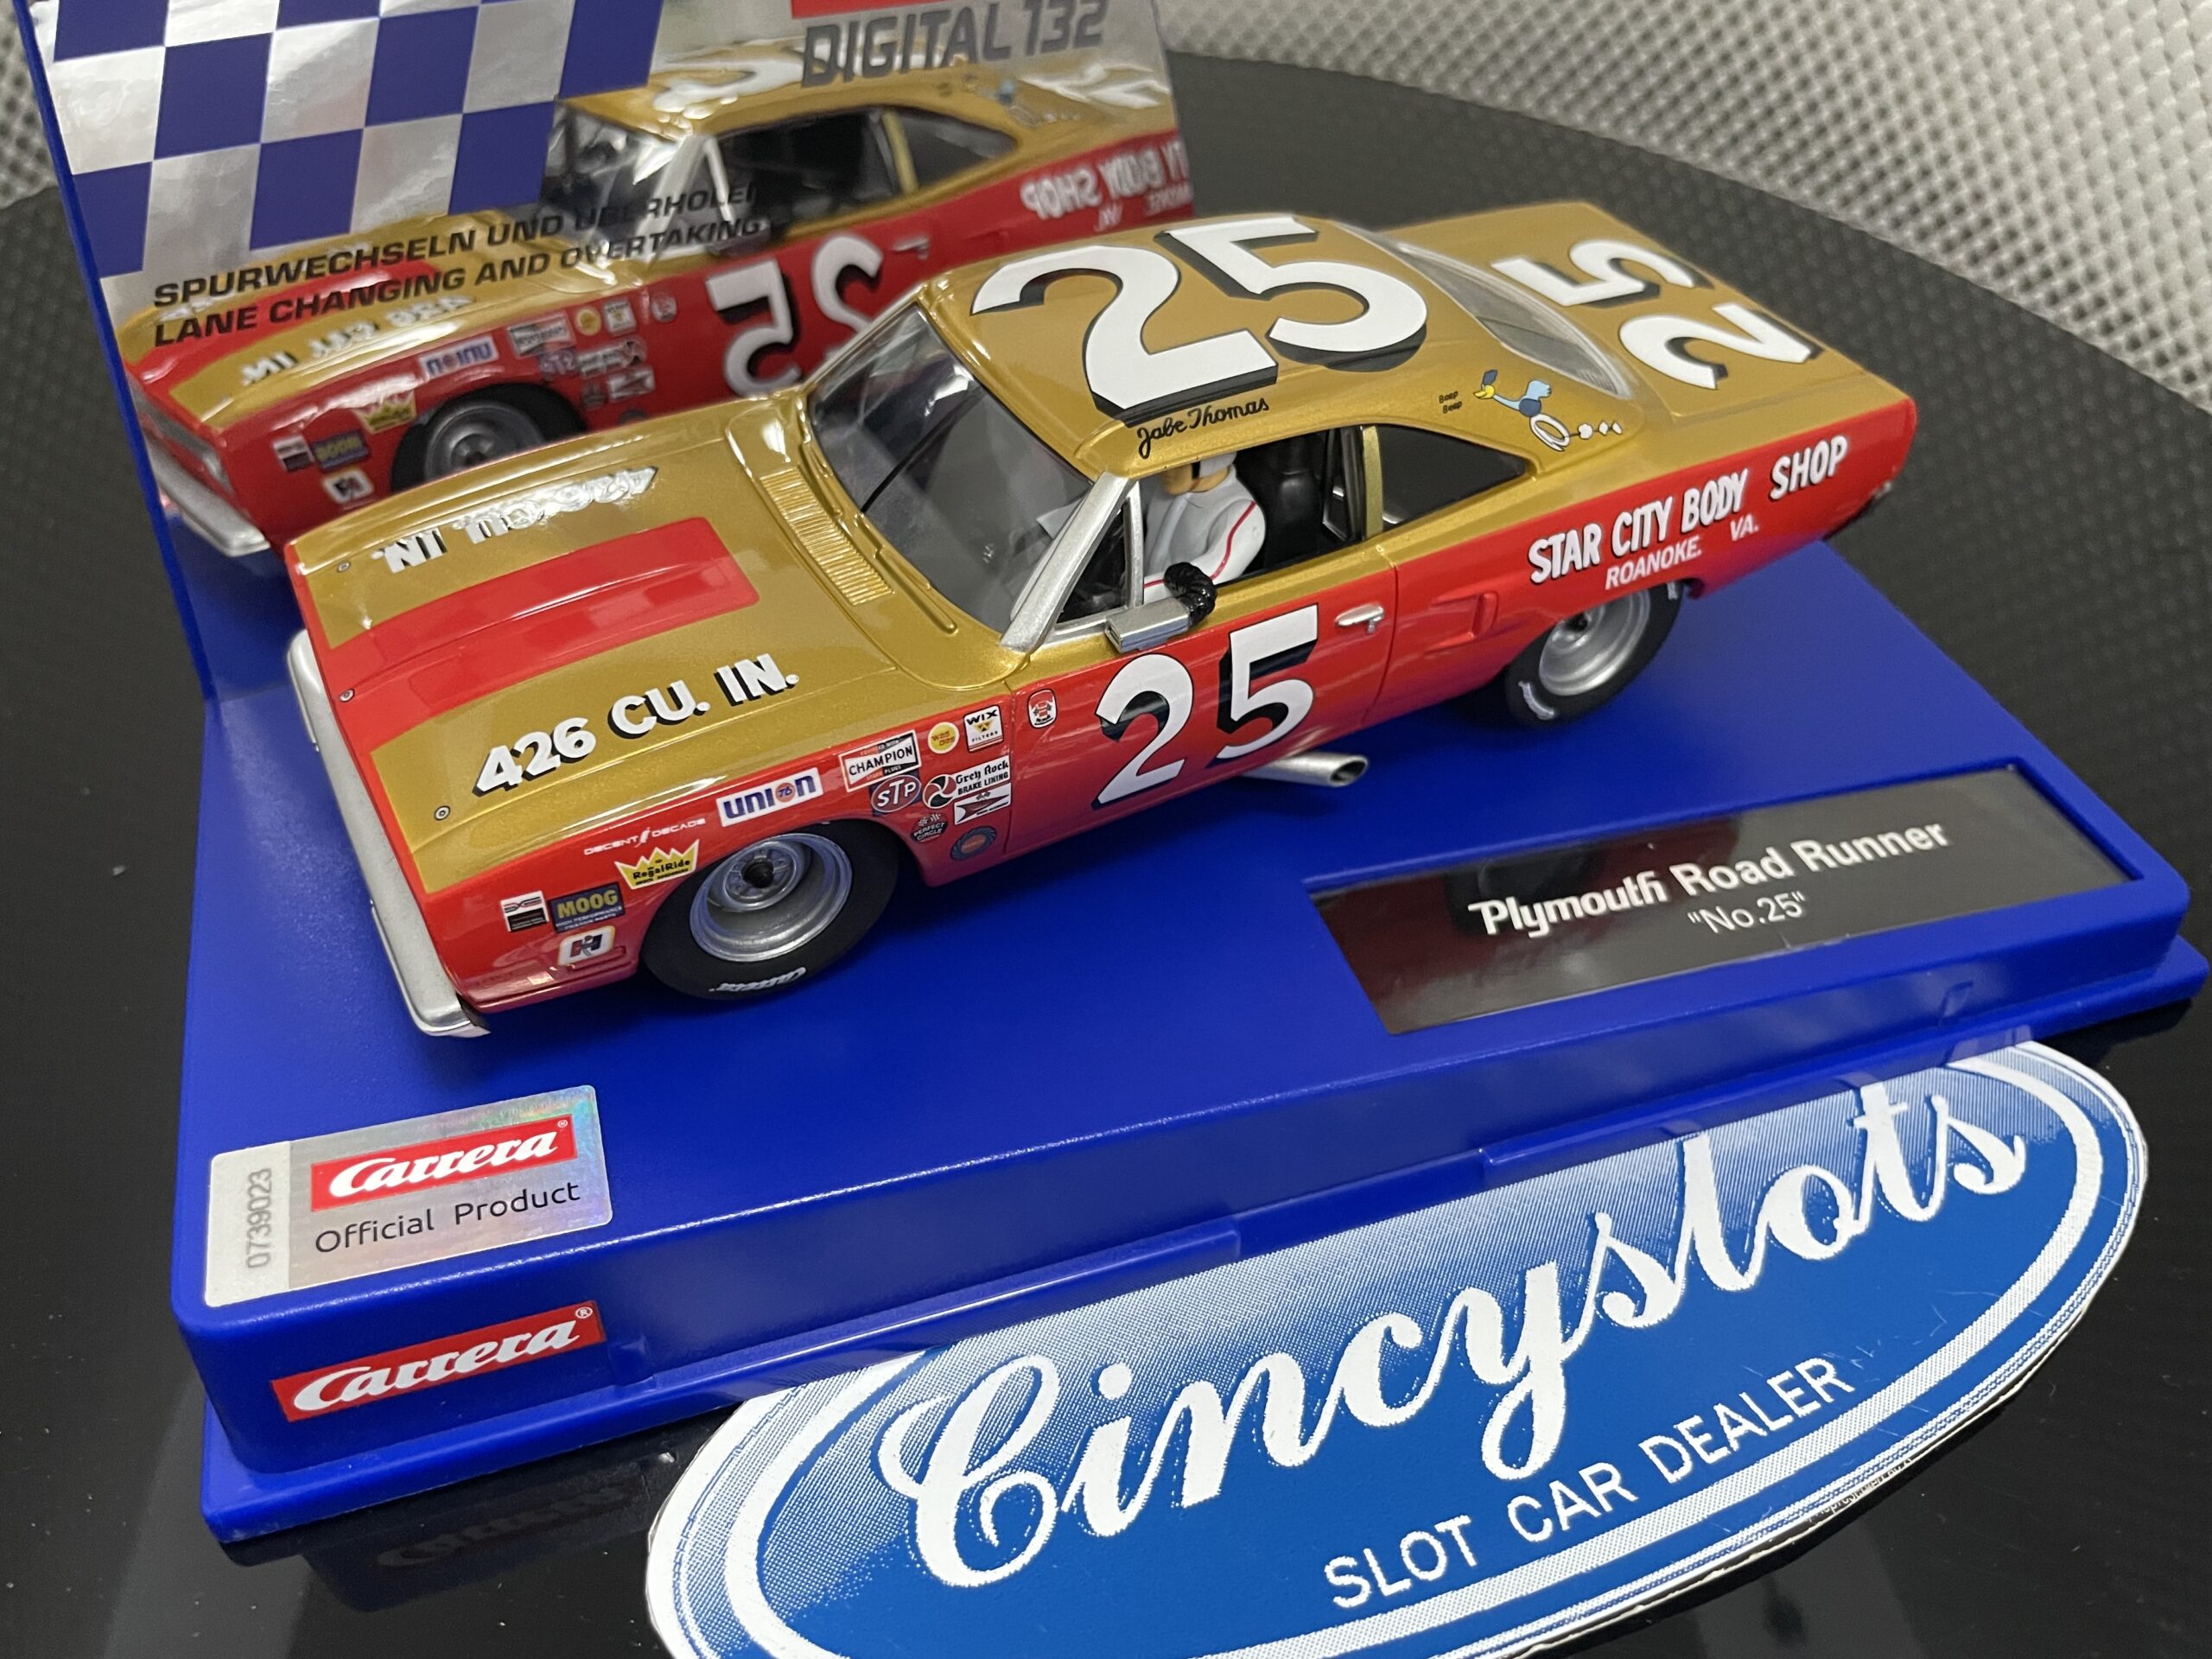  Carrera 31059 Plymouth Roadrunner No.25 1:32 Scale Digital Slot  Car Racing Vehicle Digital Slot Car Race Tracks : Toys & Games